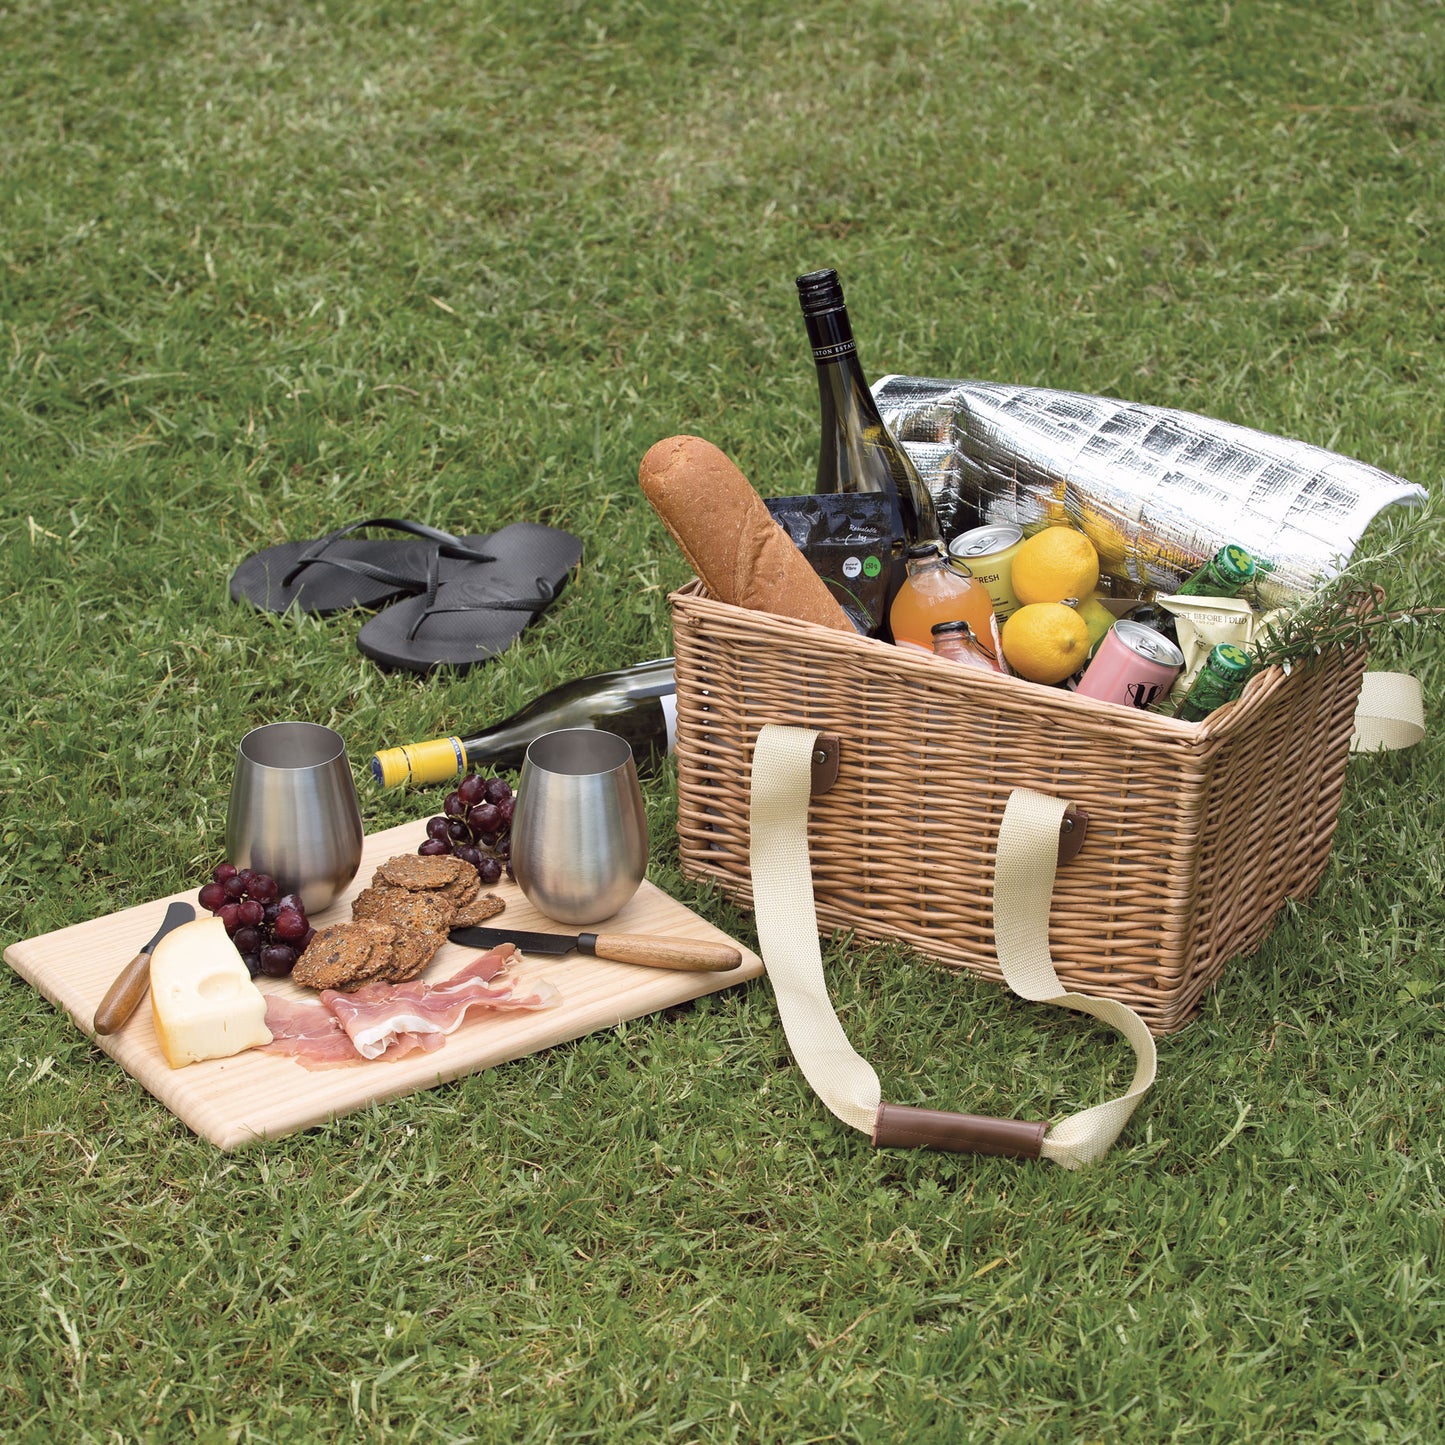 lifestyle image of wicker picnic basket opened and filled with a range of picnis fruits, drinks and bread next to a cheese board on the grass